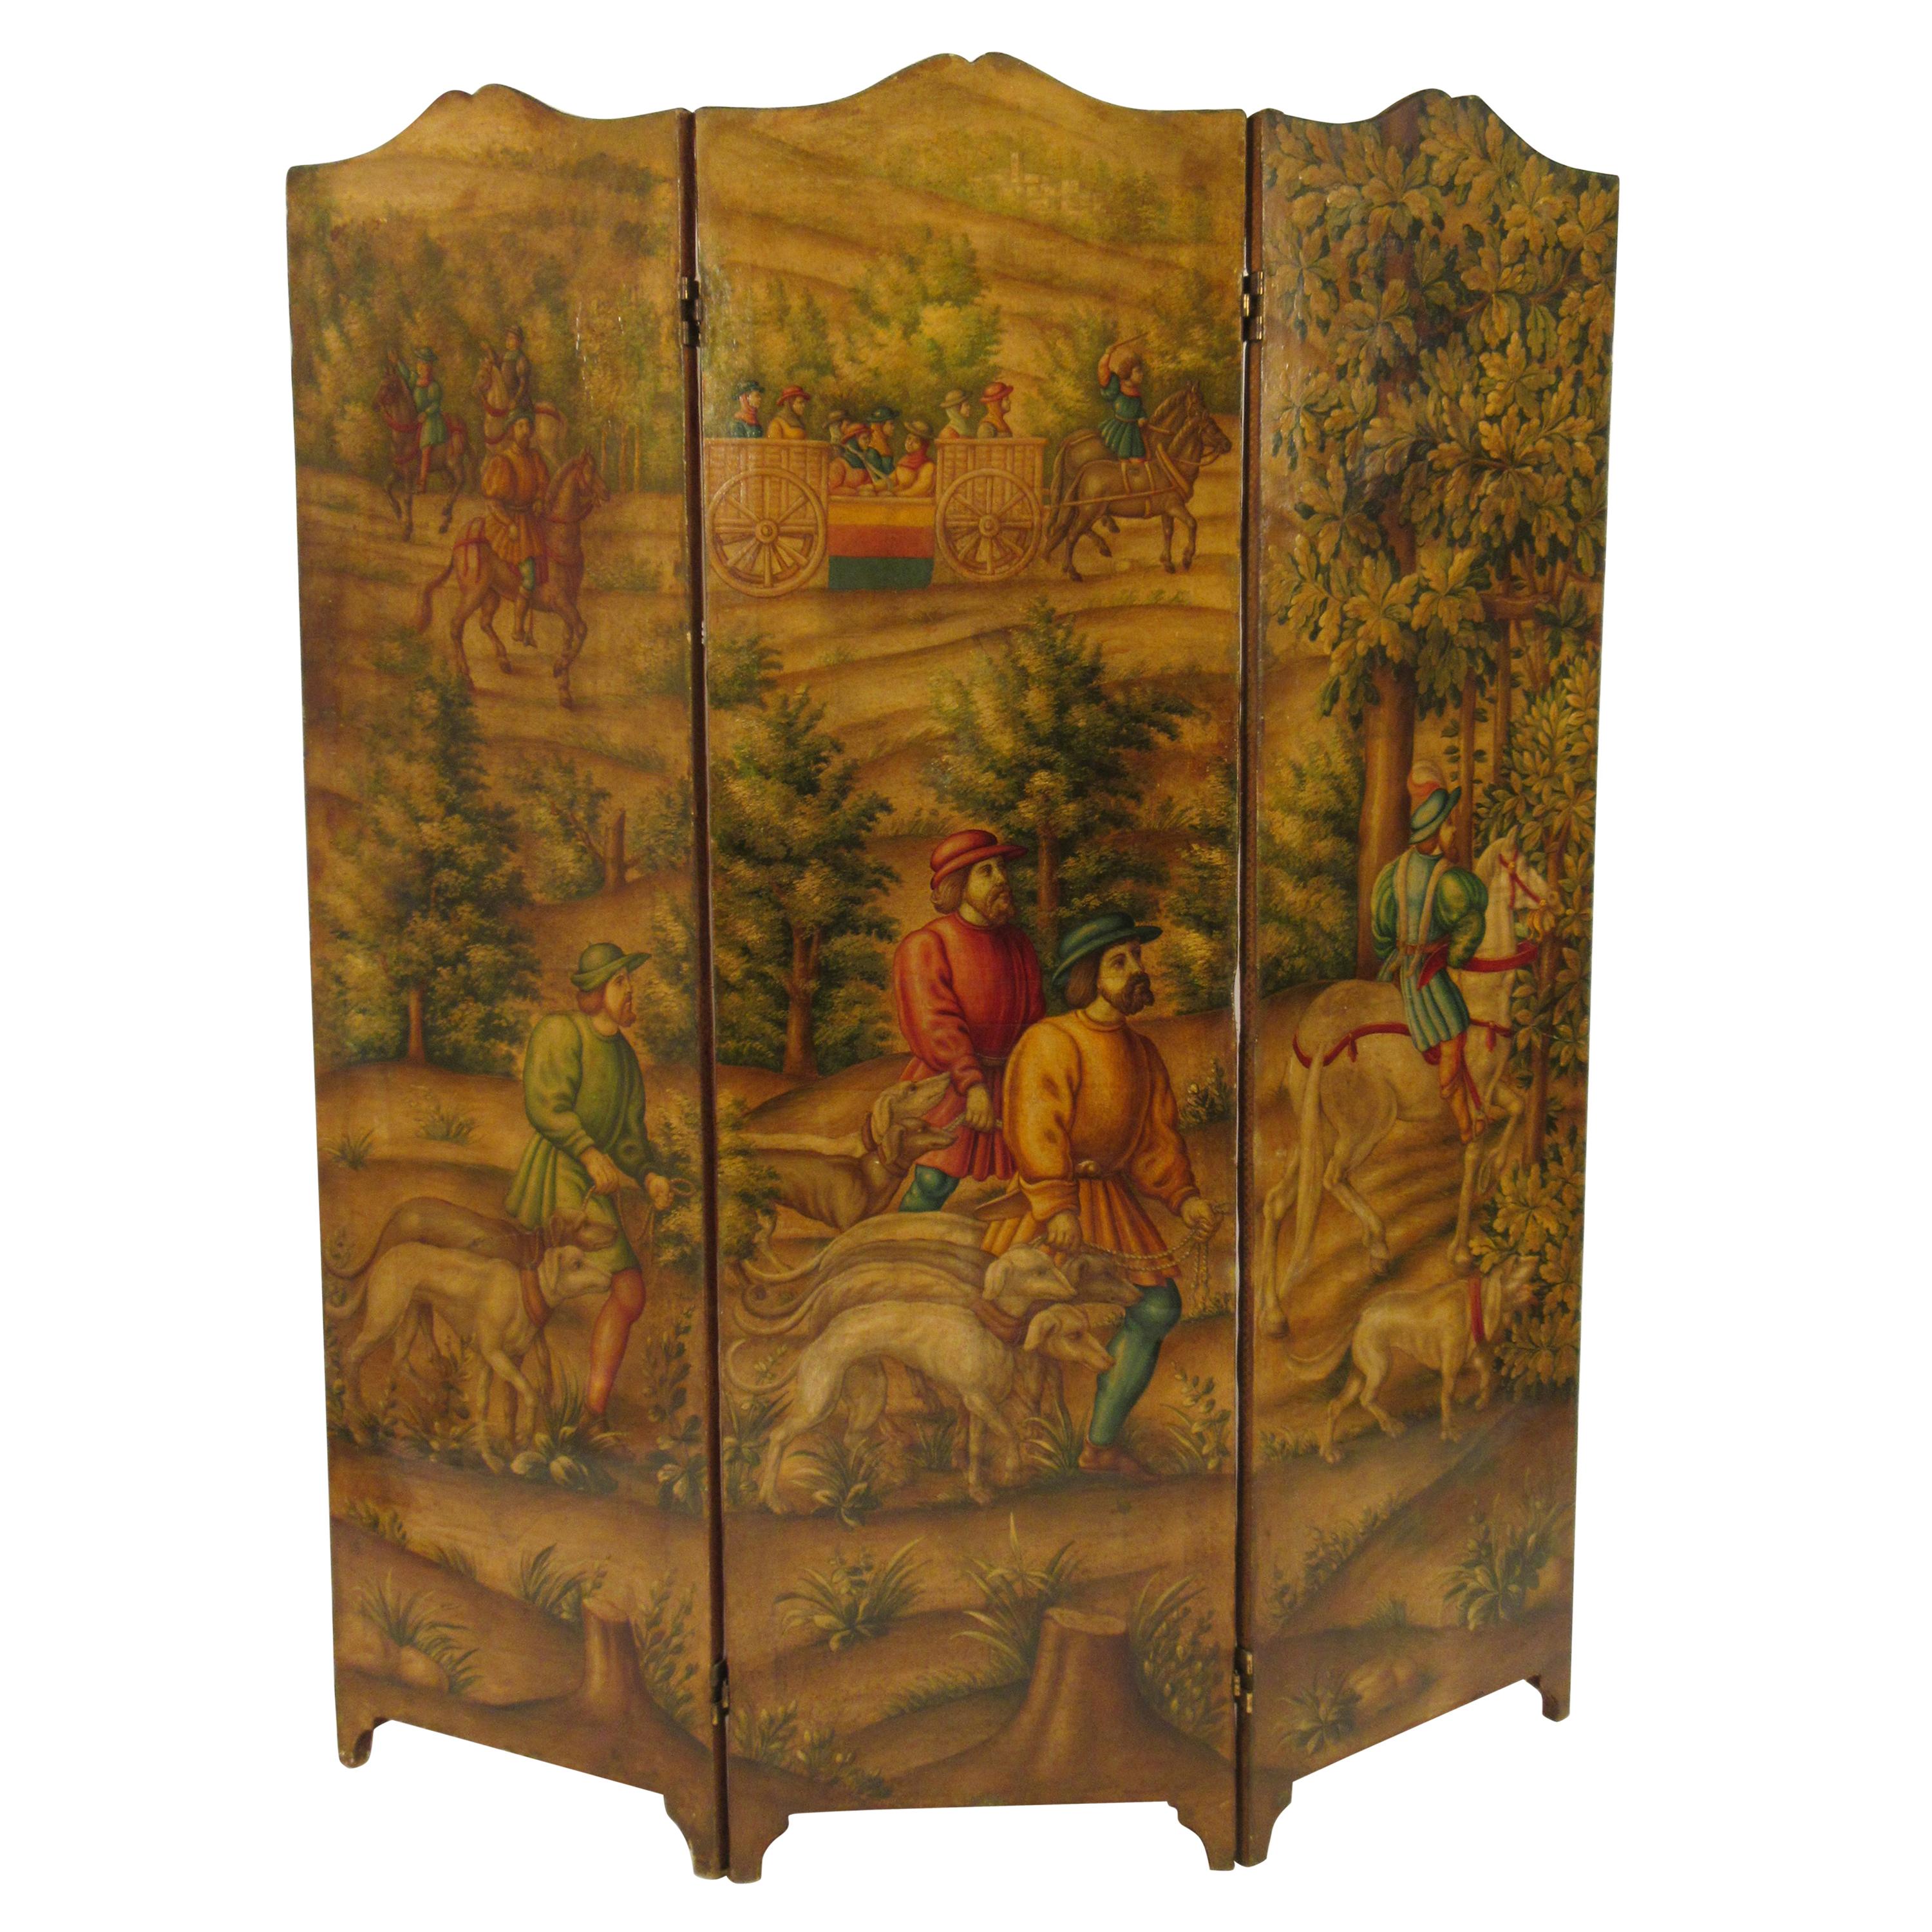 1870s Italian Painted Screen of Hunters on Hoses with Dogs